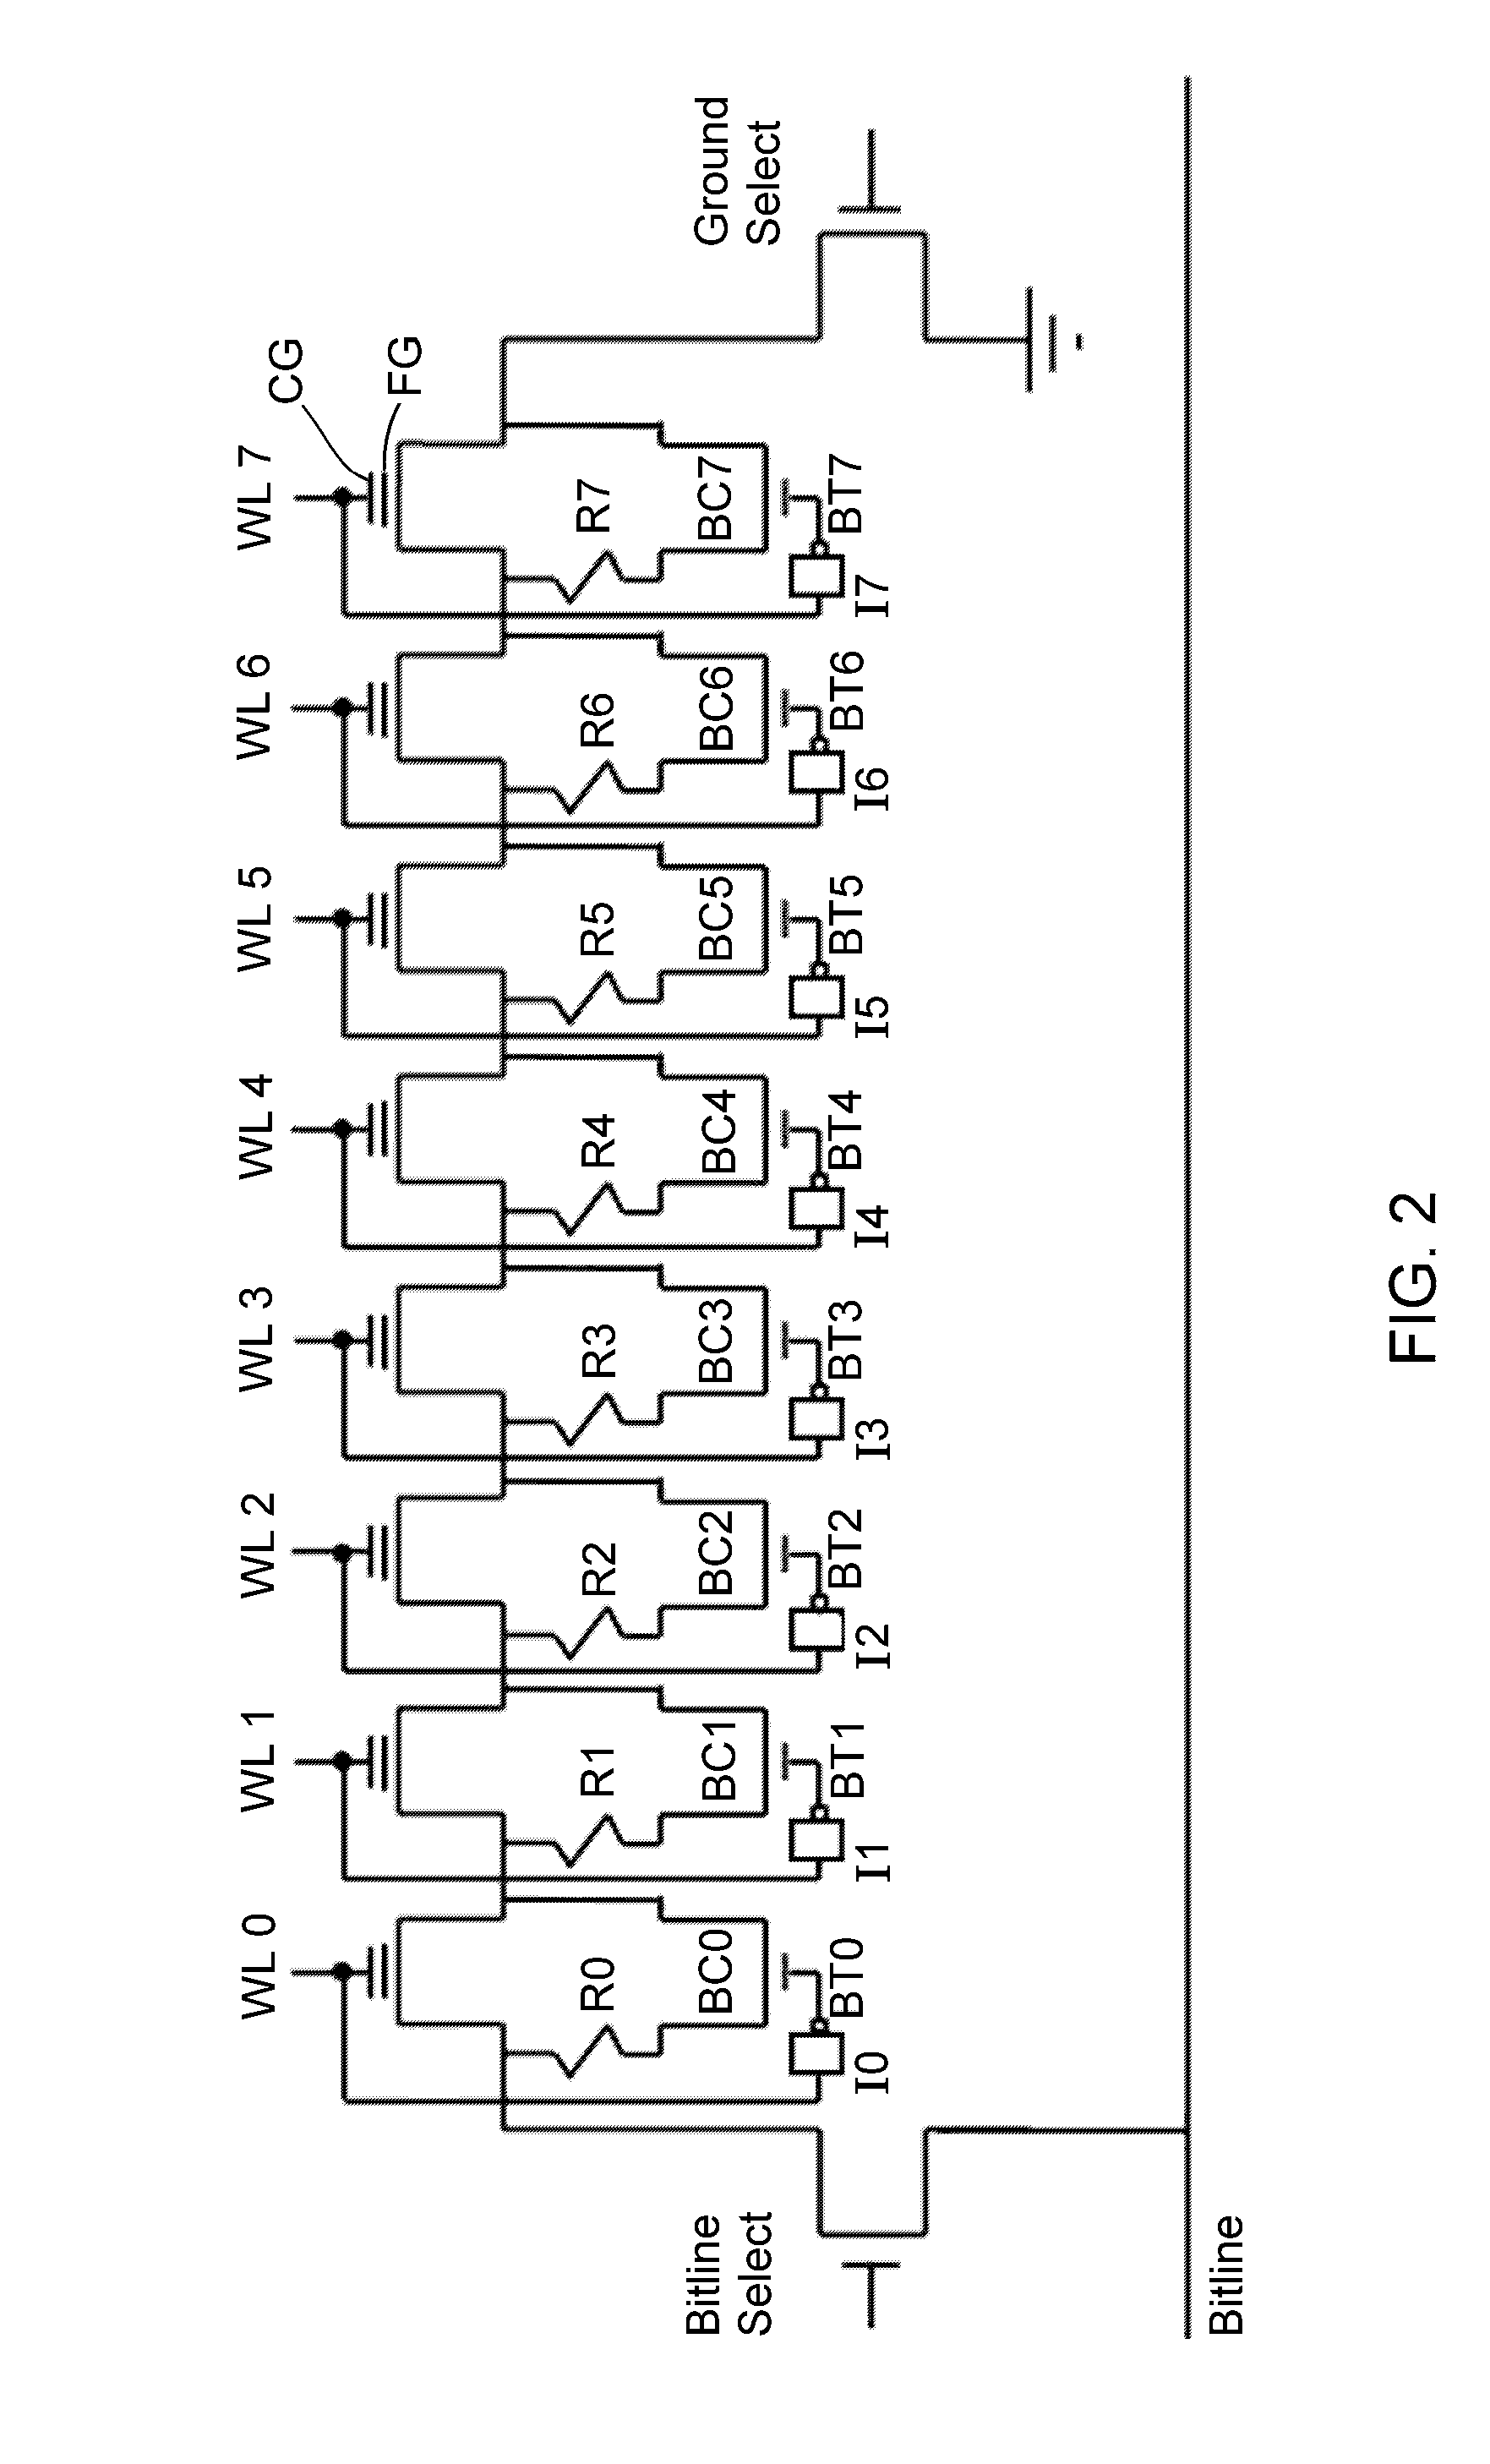 Flash memory device and method of operation